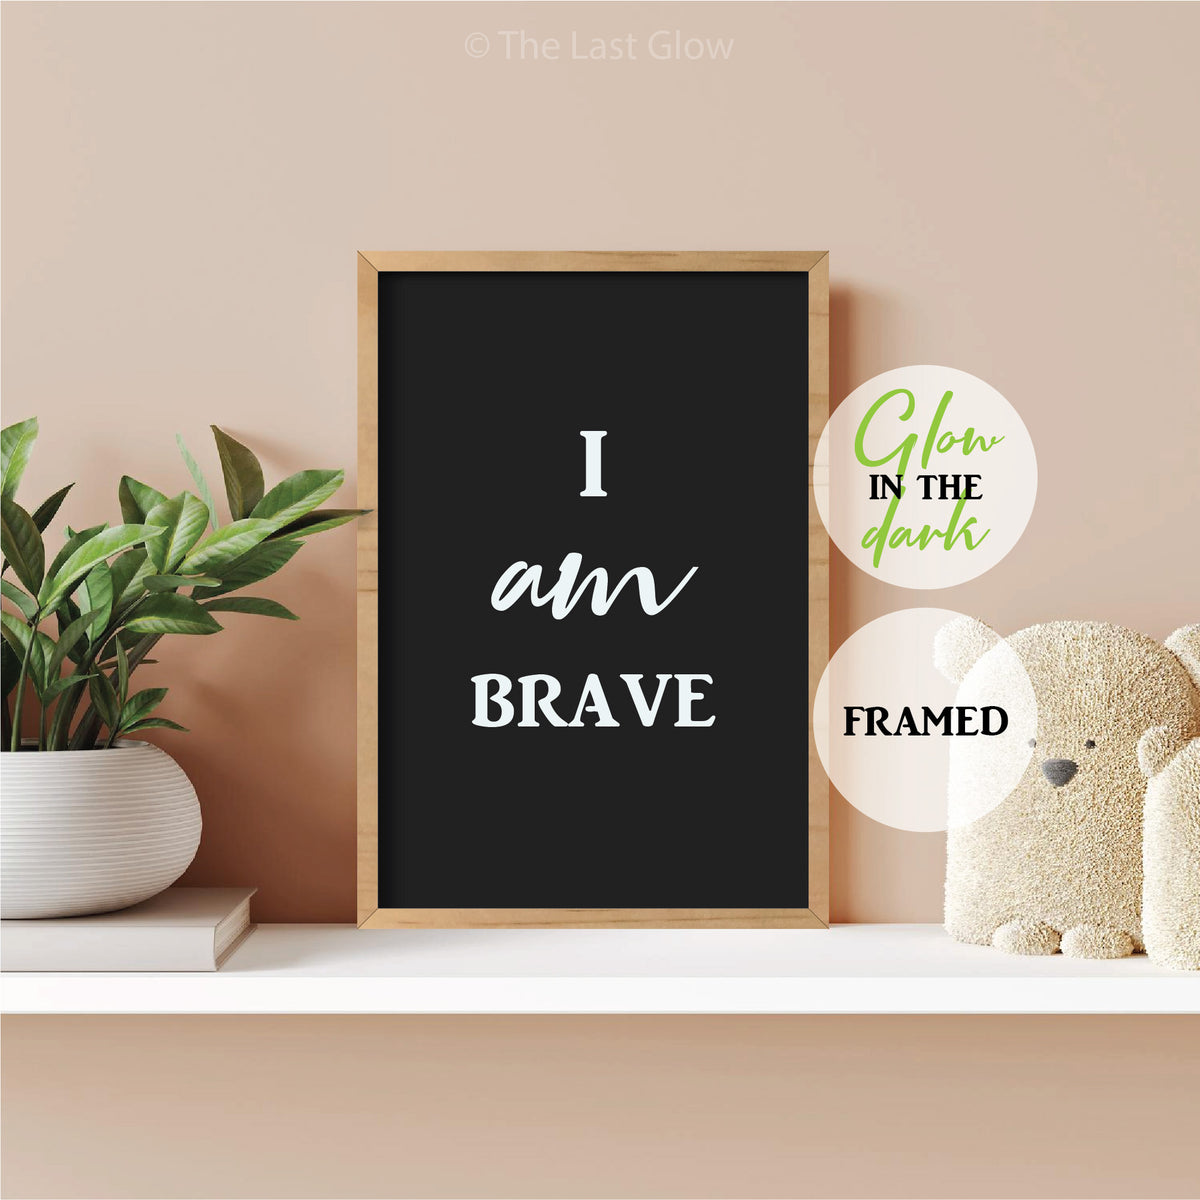 Glow In The Dark Print Positive Affirmation Sign For Kids Room Decor I Am Brave Wall Nursery Decor Light Up Baby Shower Gift Poster Quote